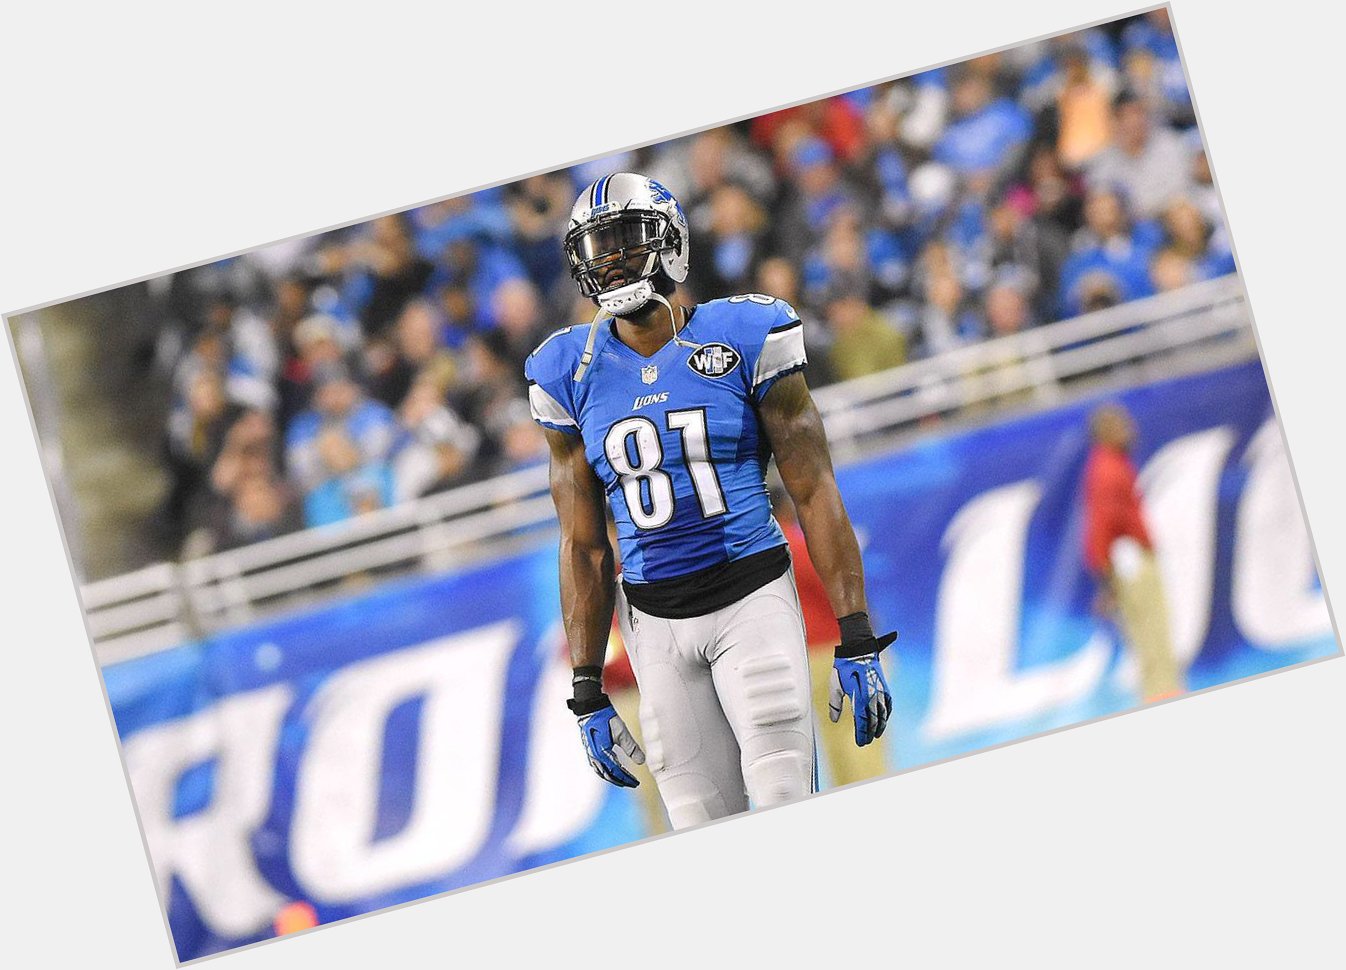 Happy 33rd birthday to the best receiver to play the game, Calvin Johnson! 